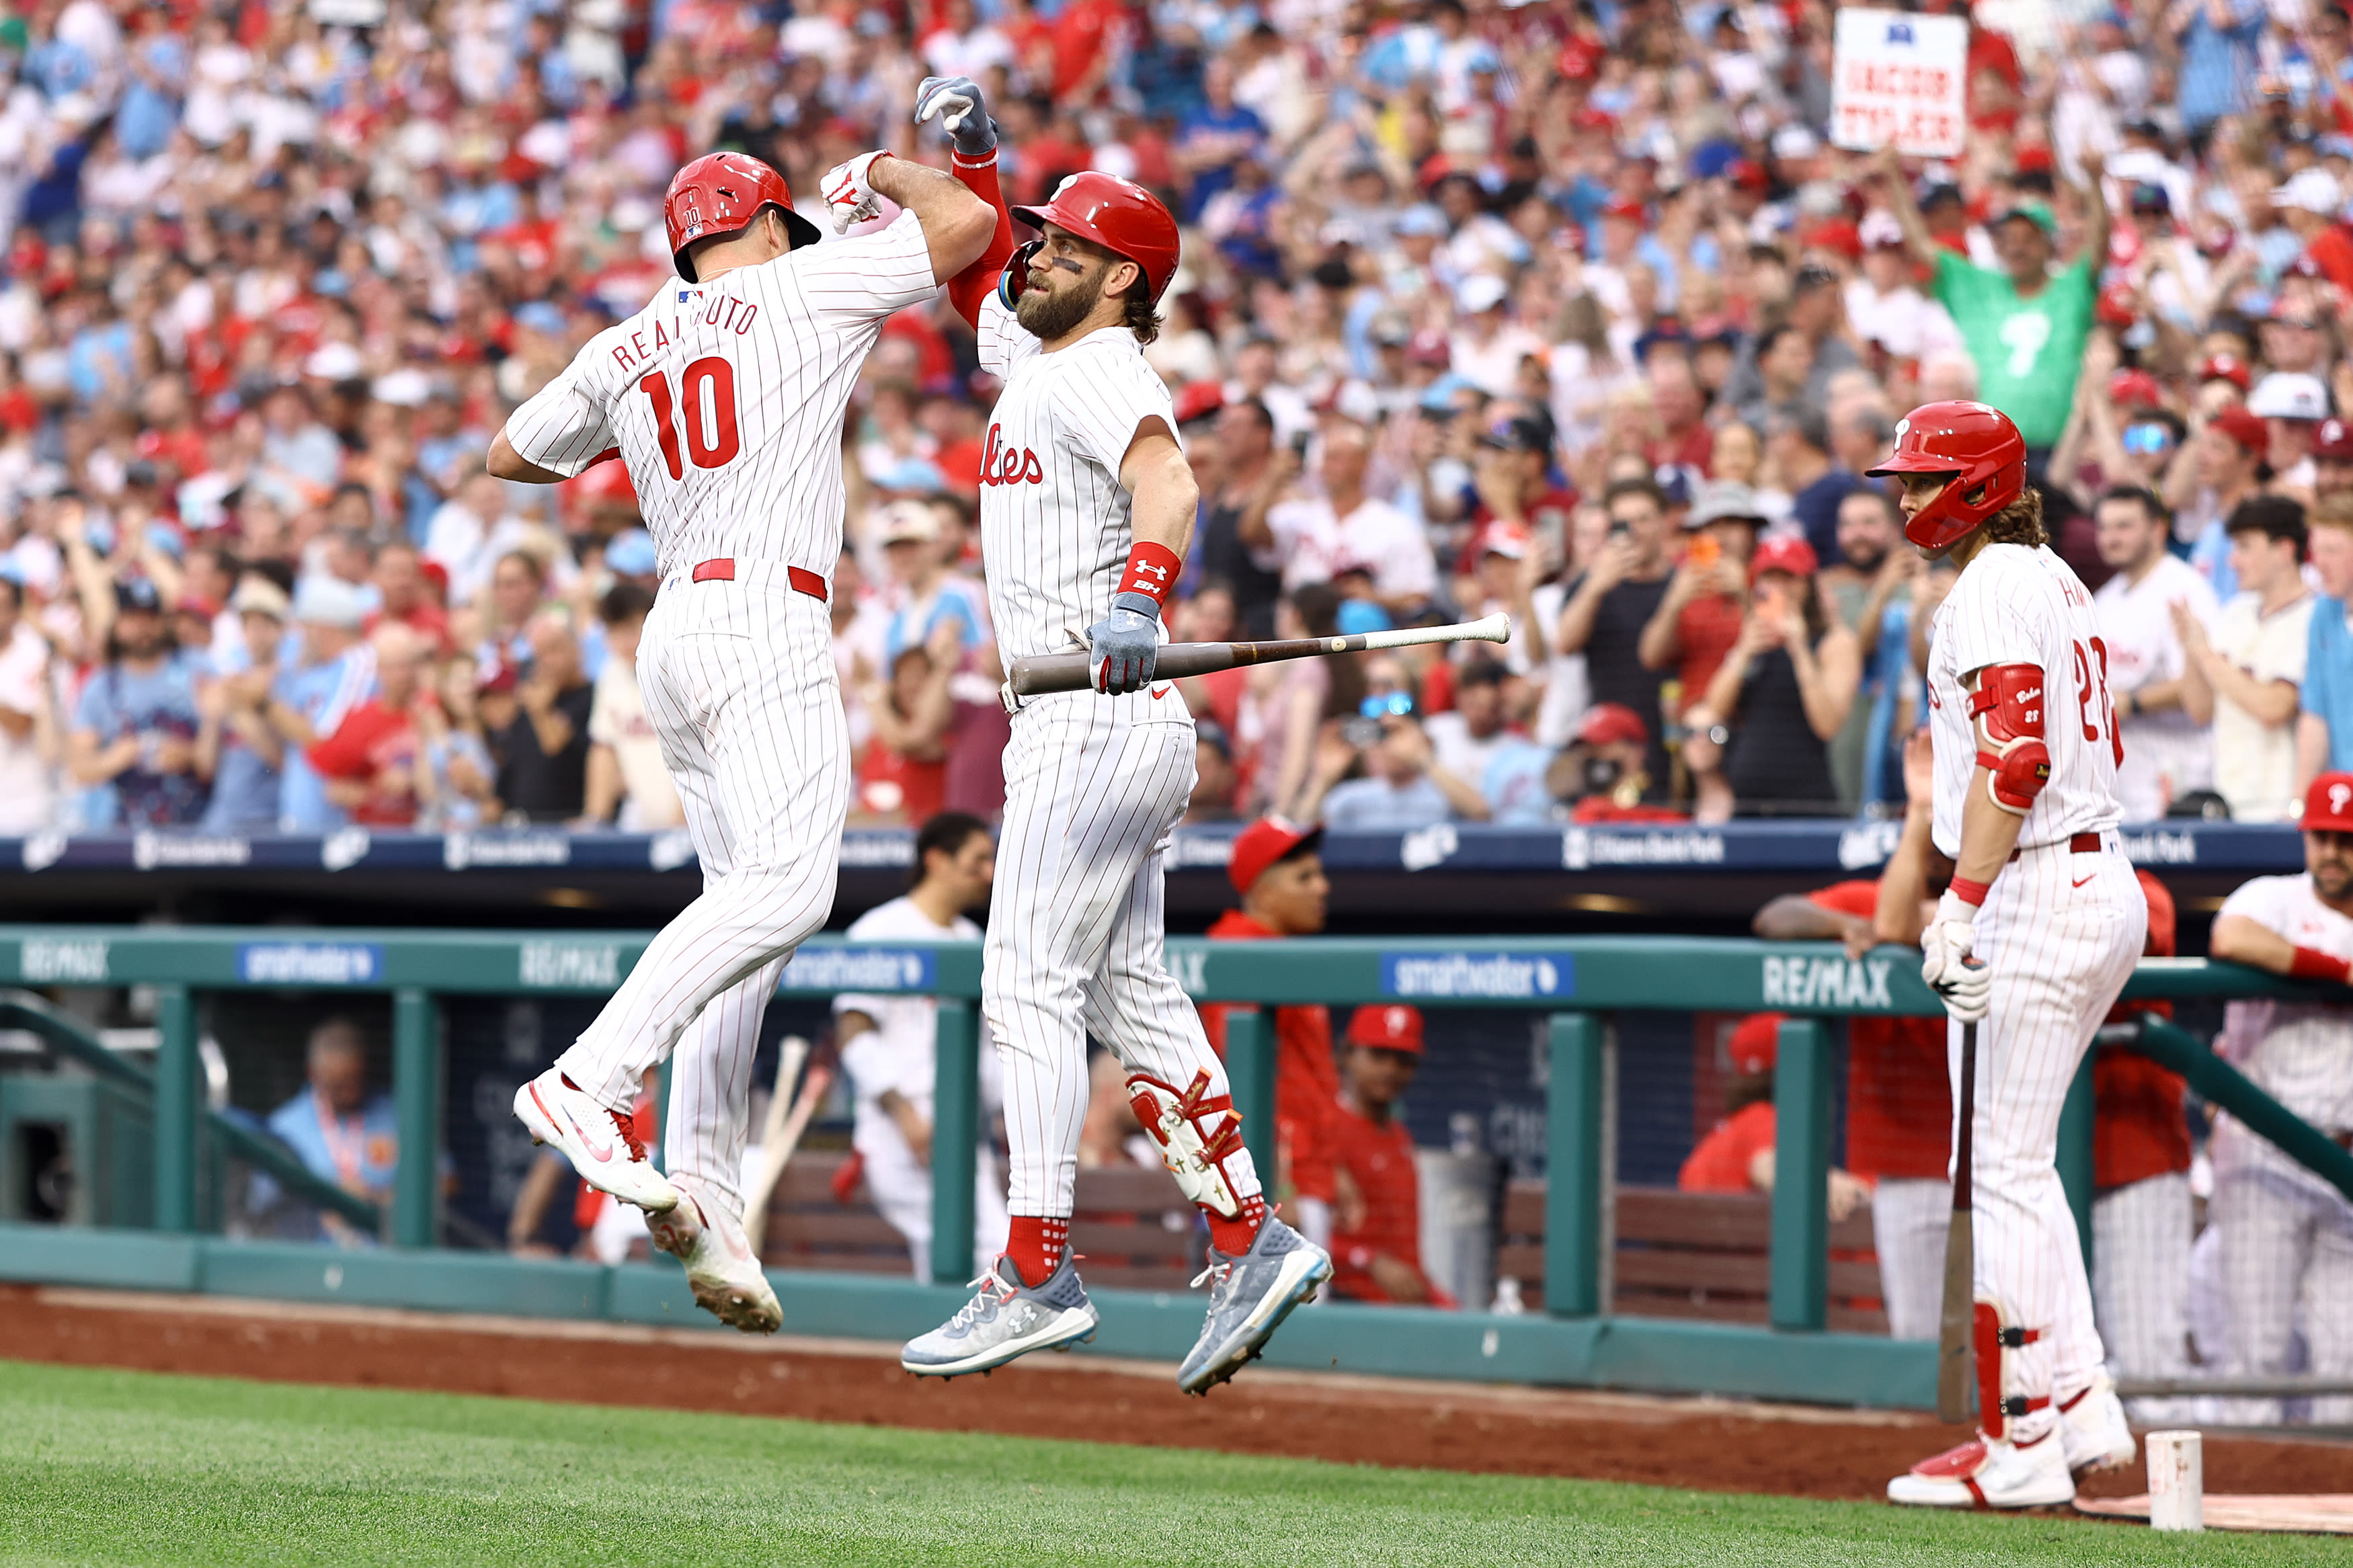 Phillies improve record to 36-14, MLB's best 50-game start since 2001 Mariners